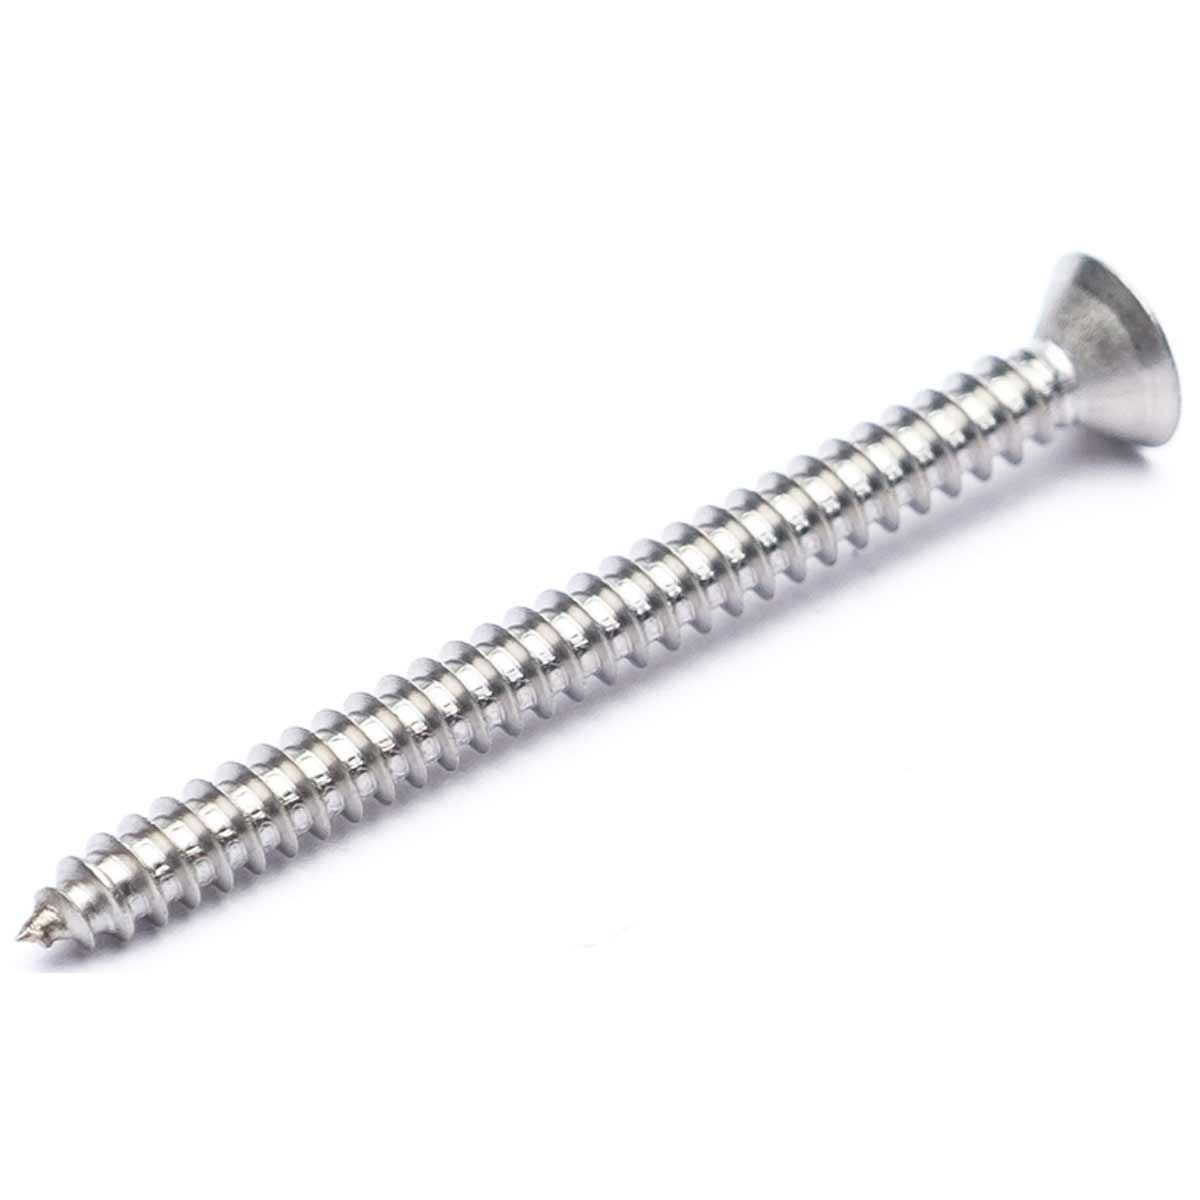 AG ECS Vent No6 x 1/2" Stainless Steel Pan HD Slotted Self Tapping Screw